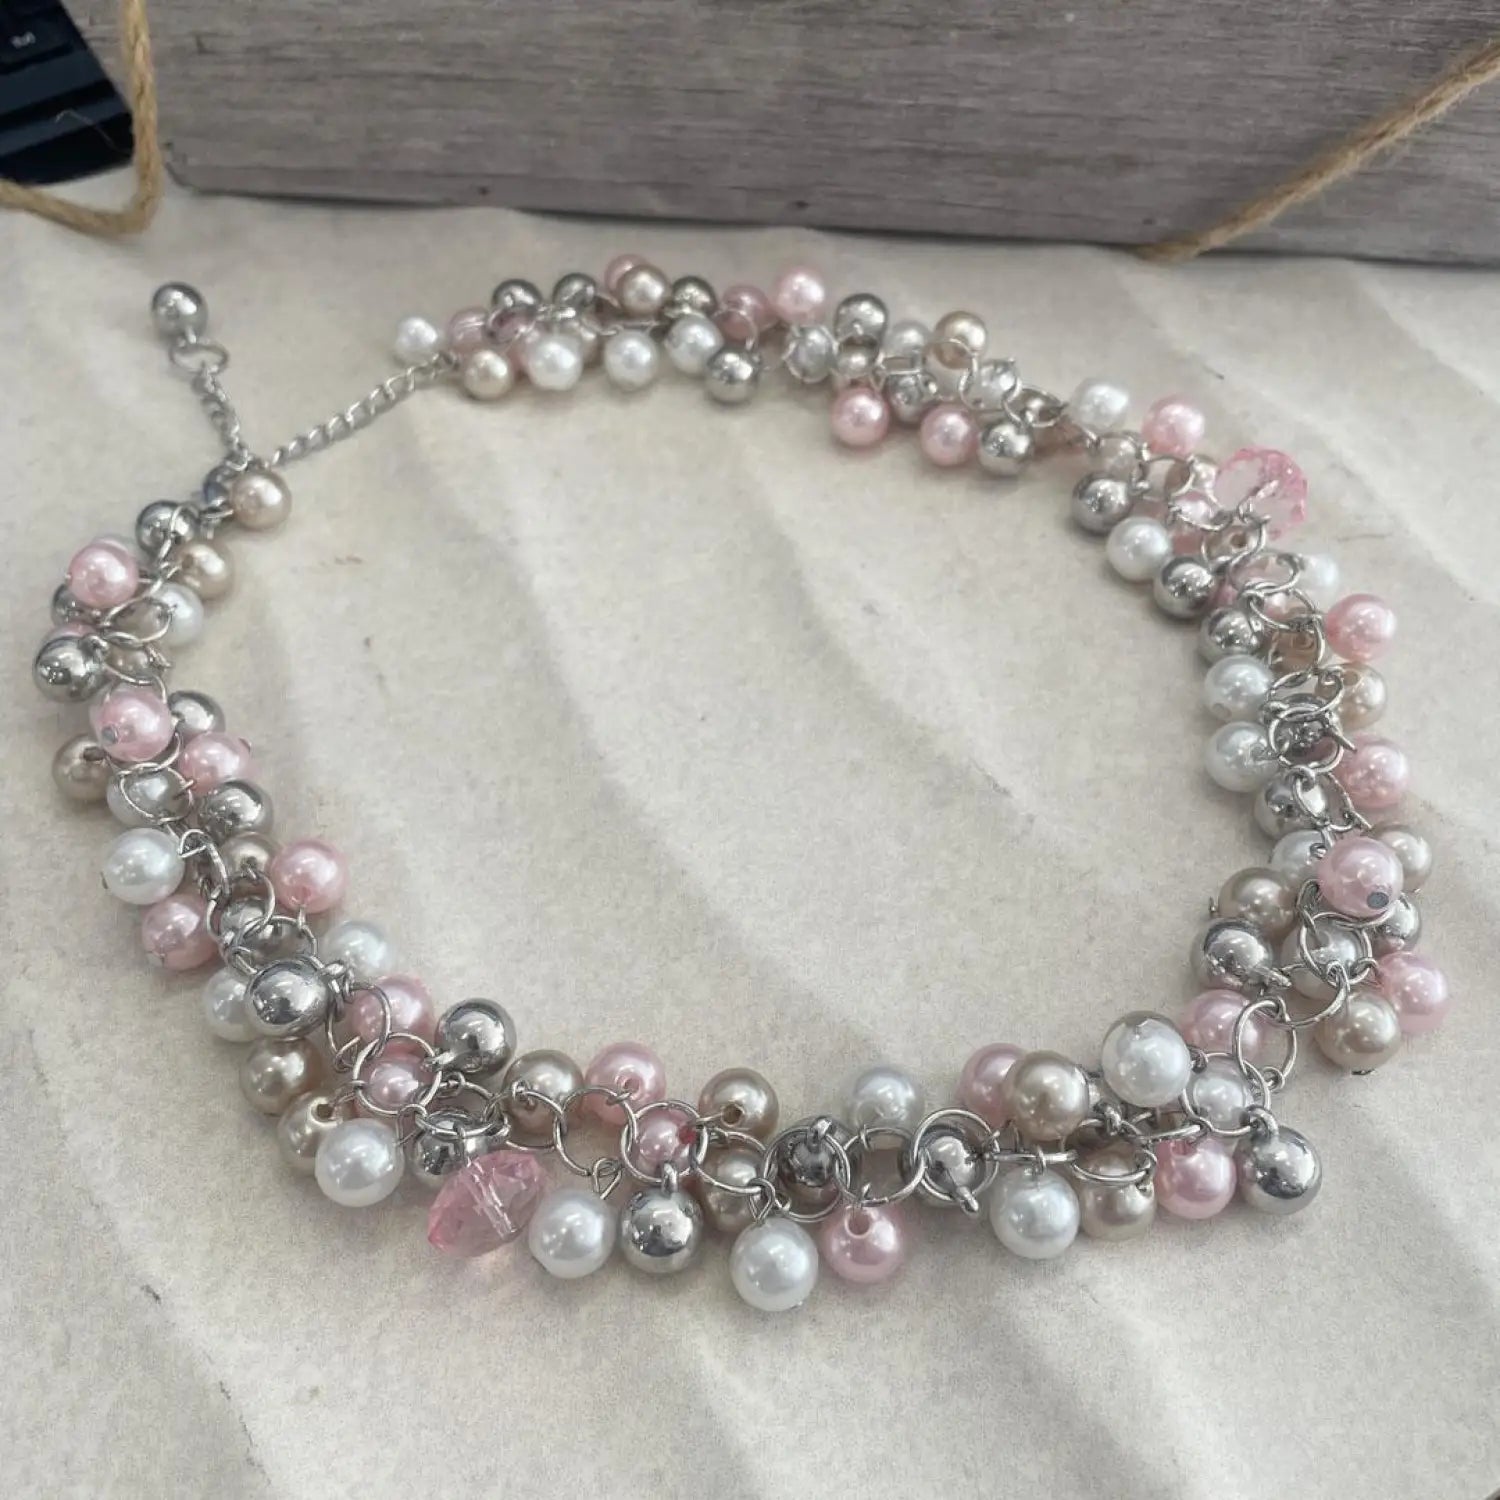 Pink Pearl Cluster Bib Necklace featuring a pink and silver bracelet with pearls